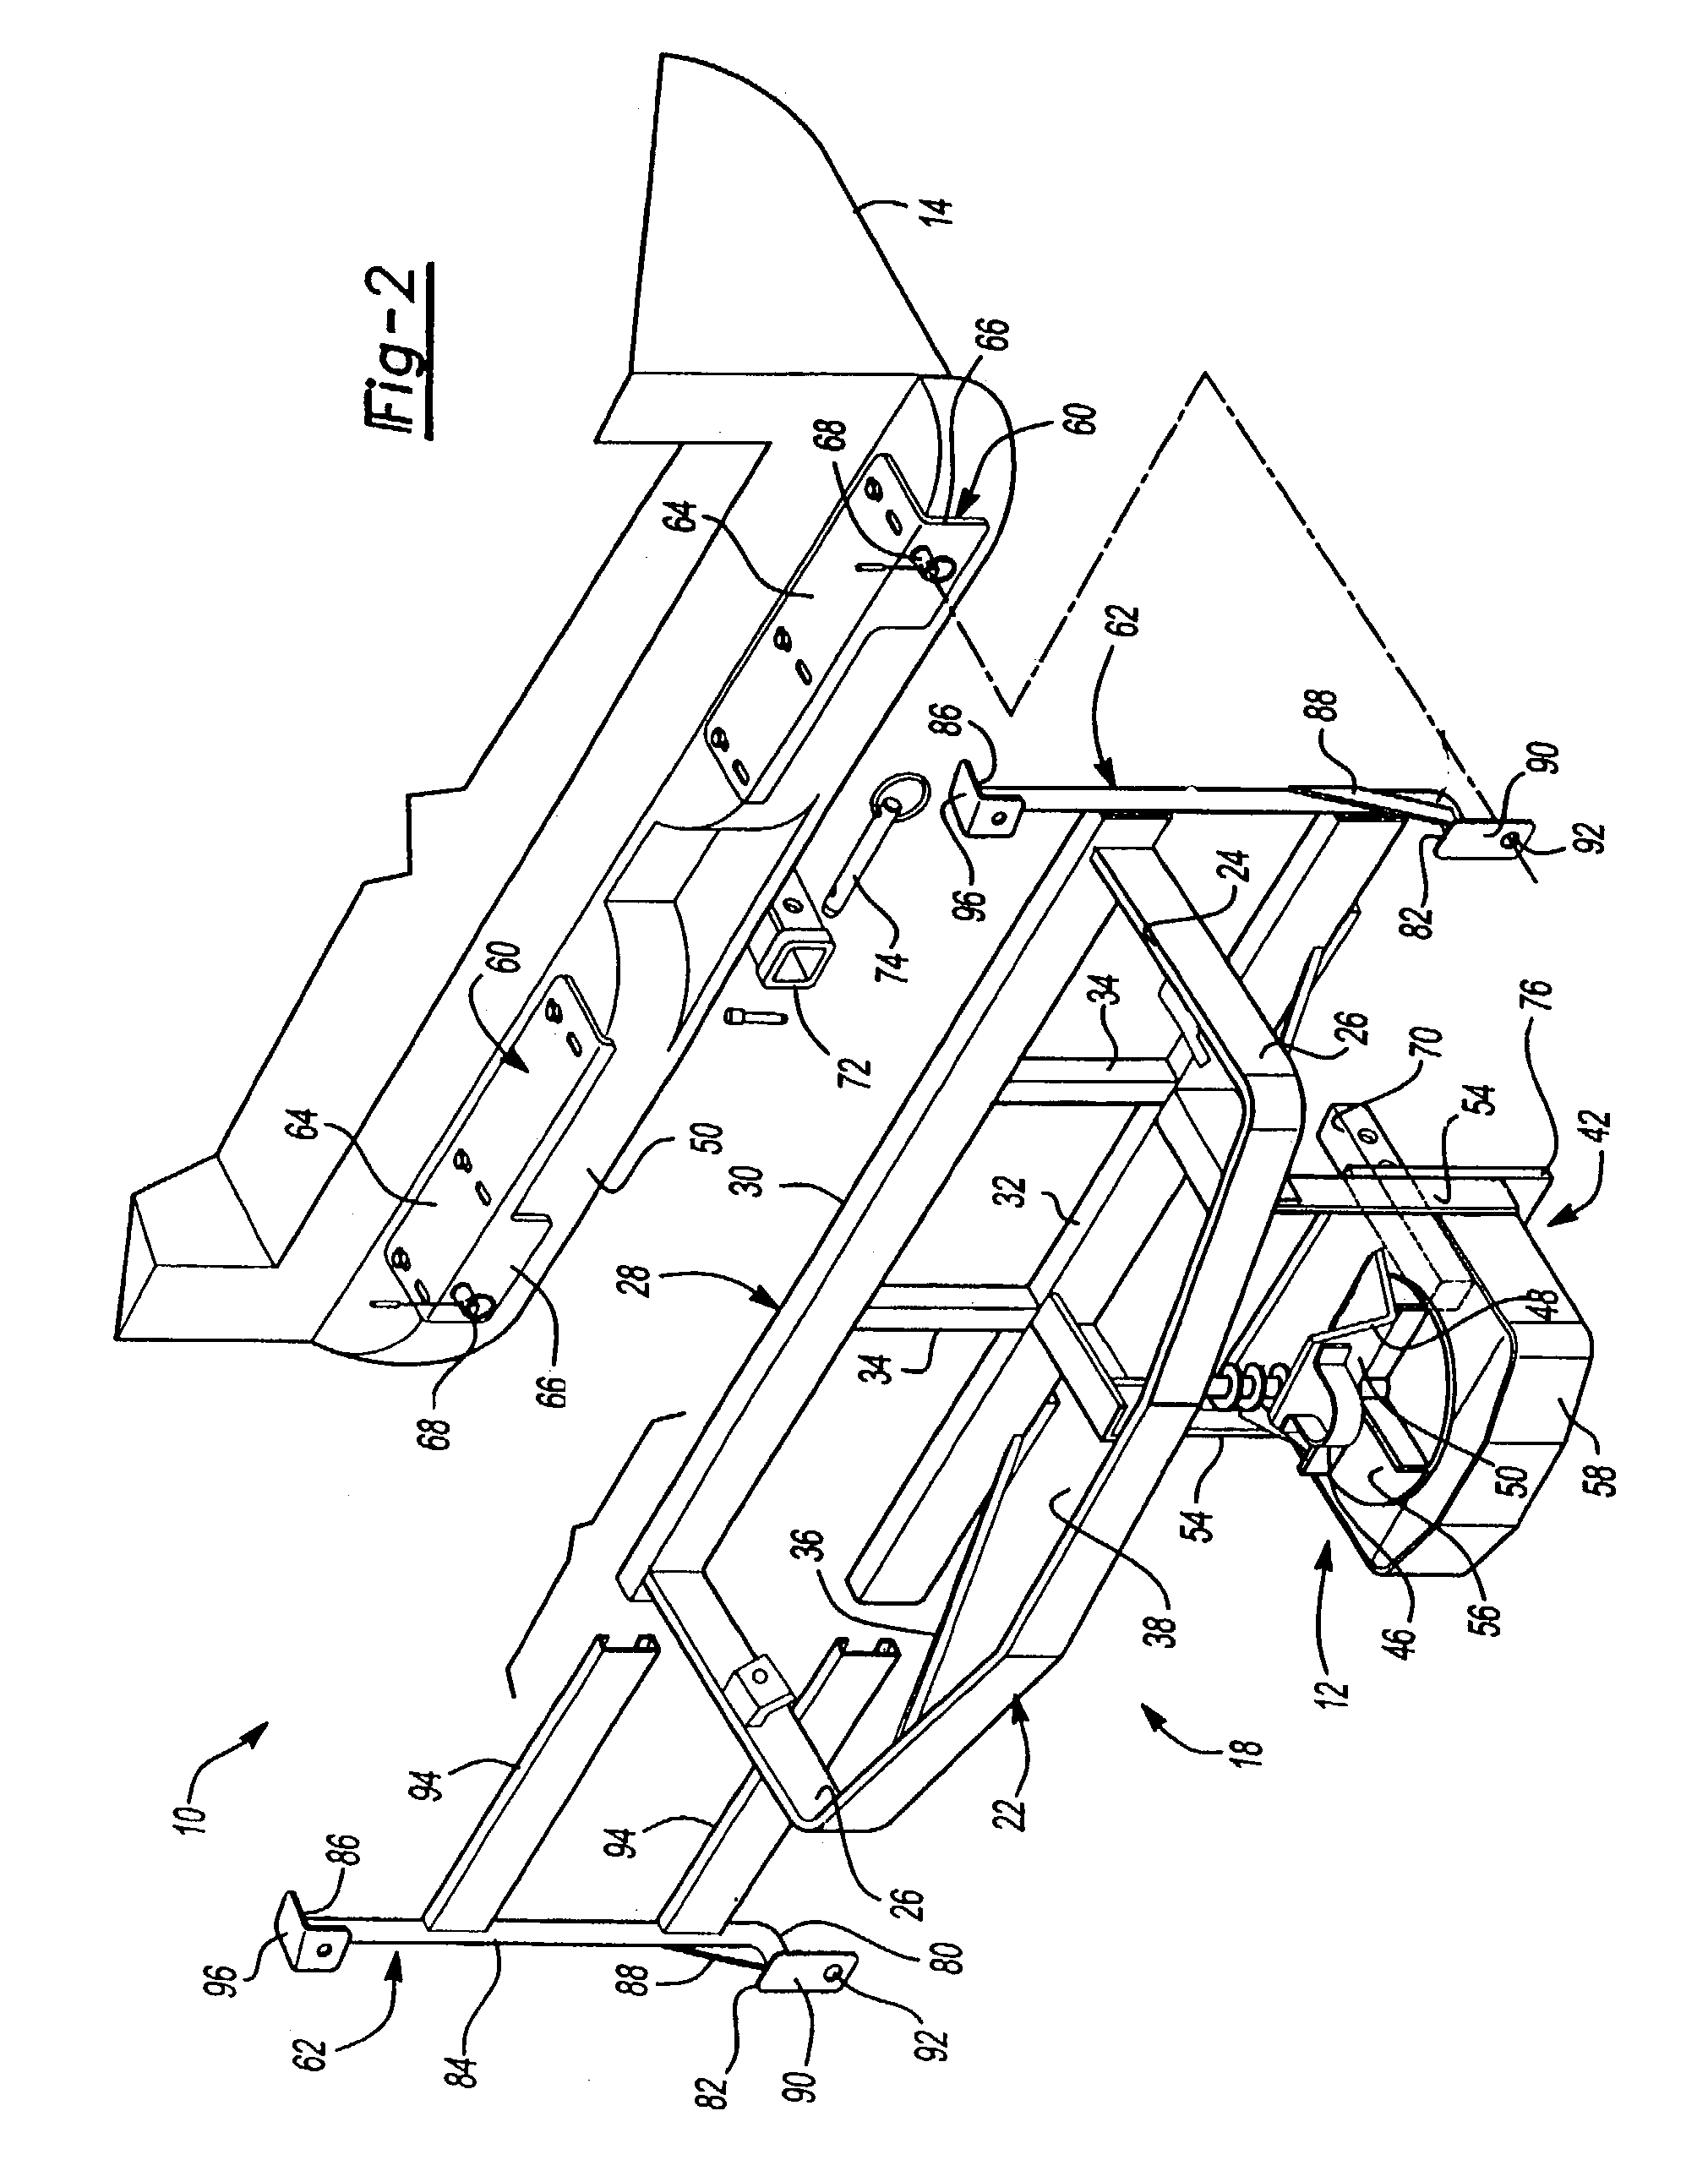 Mounting assembly for supporting a hopper and a spreading mechanism on a vehicle